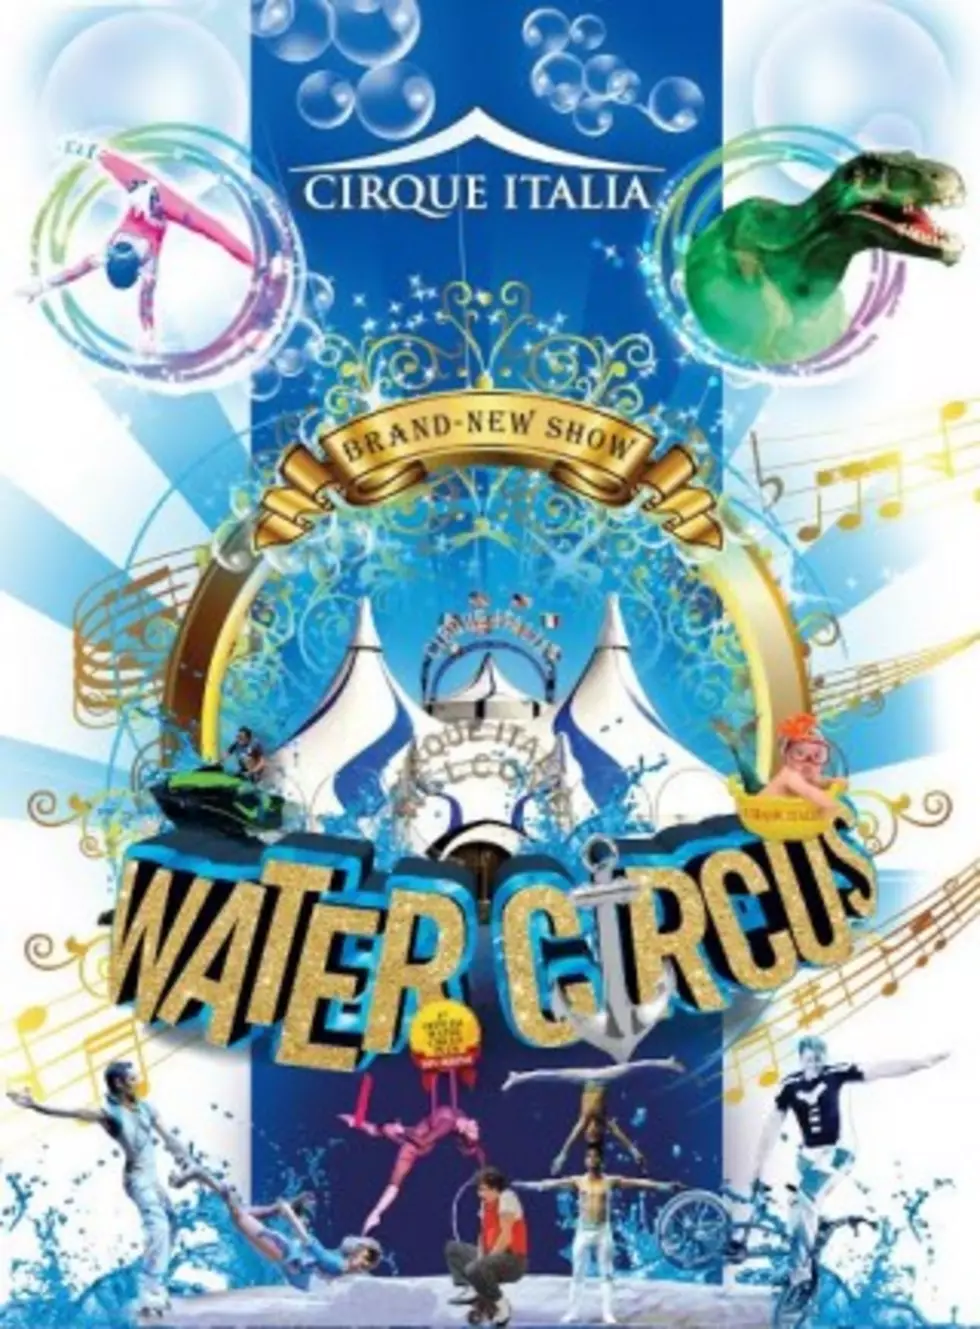 Cirque Italia Comes To Waterloo This Week!